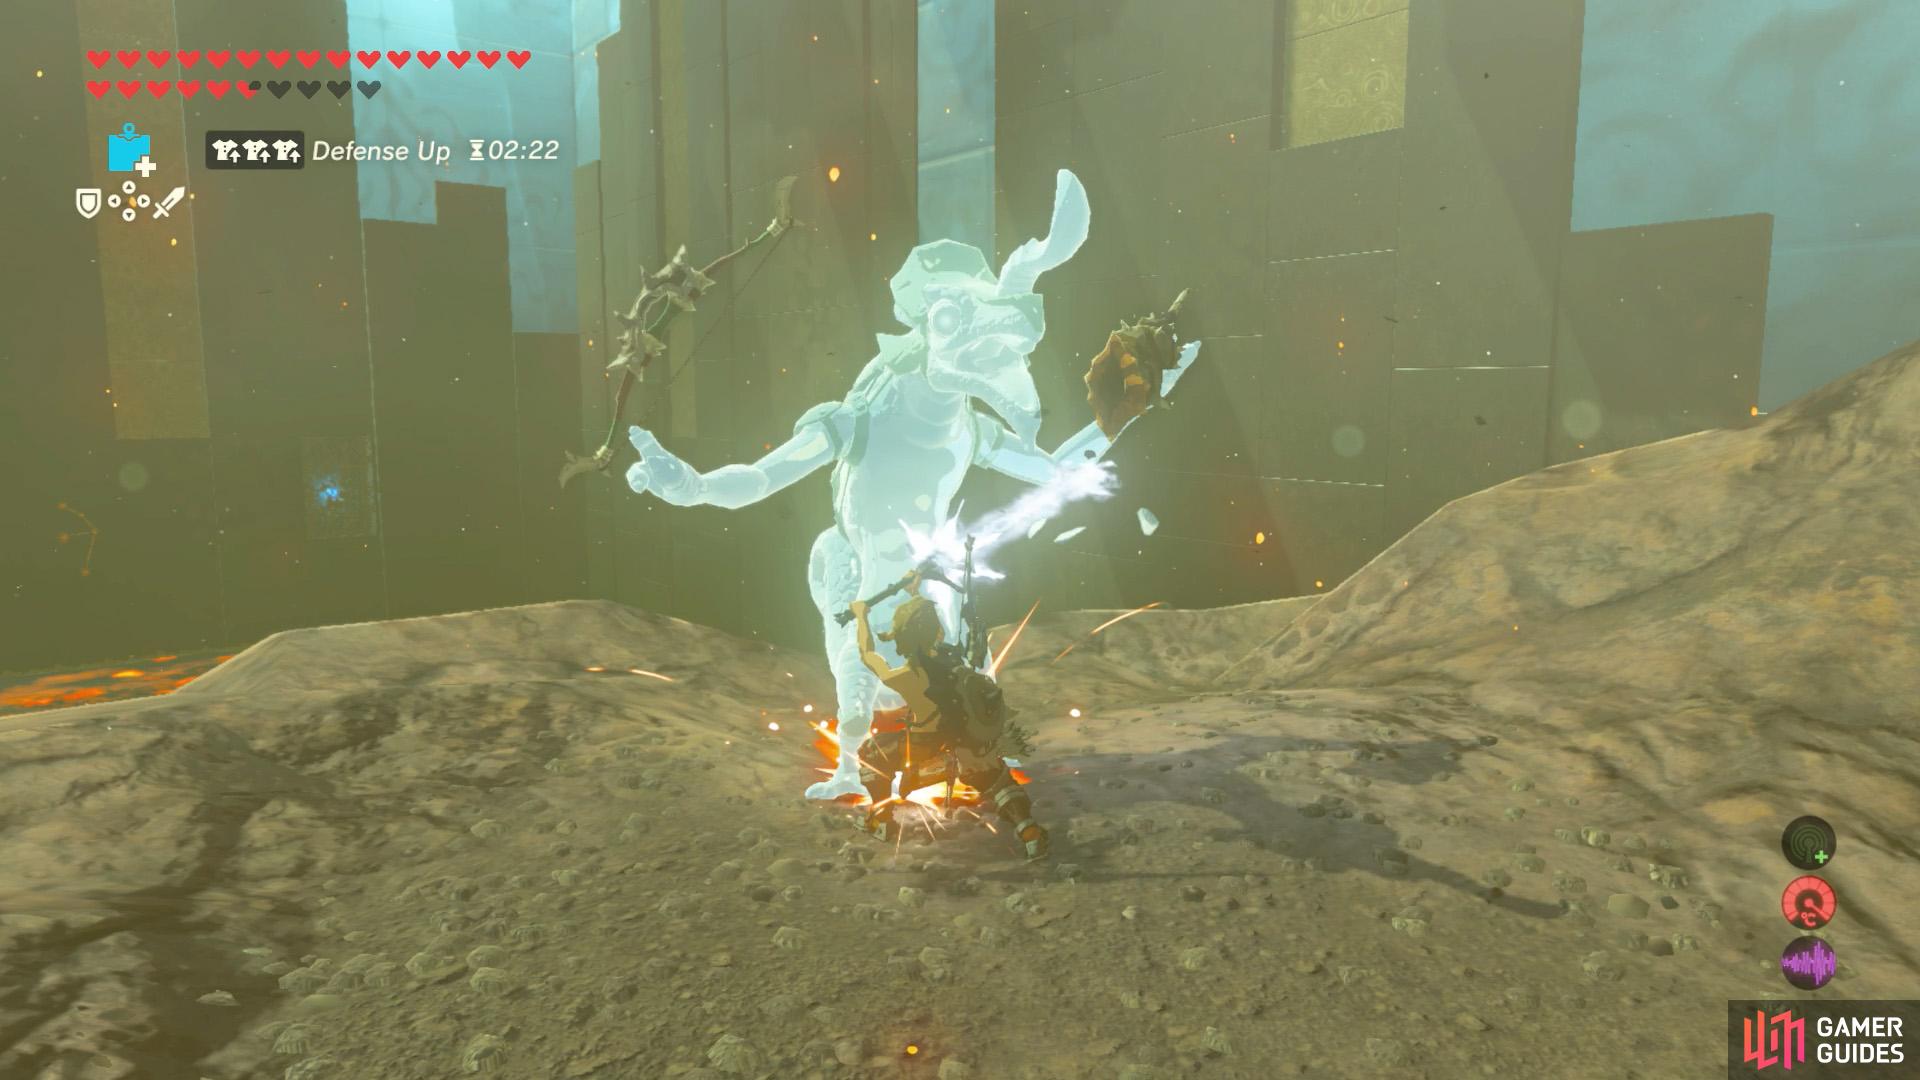 Before heading there, freeze the Lizalfos on the right.